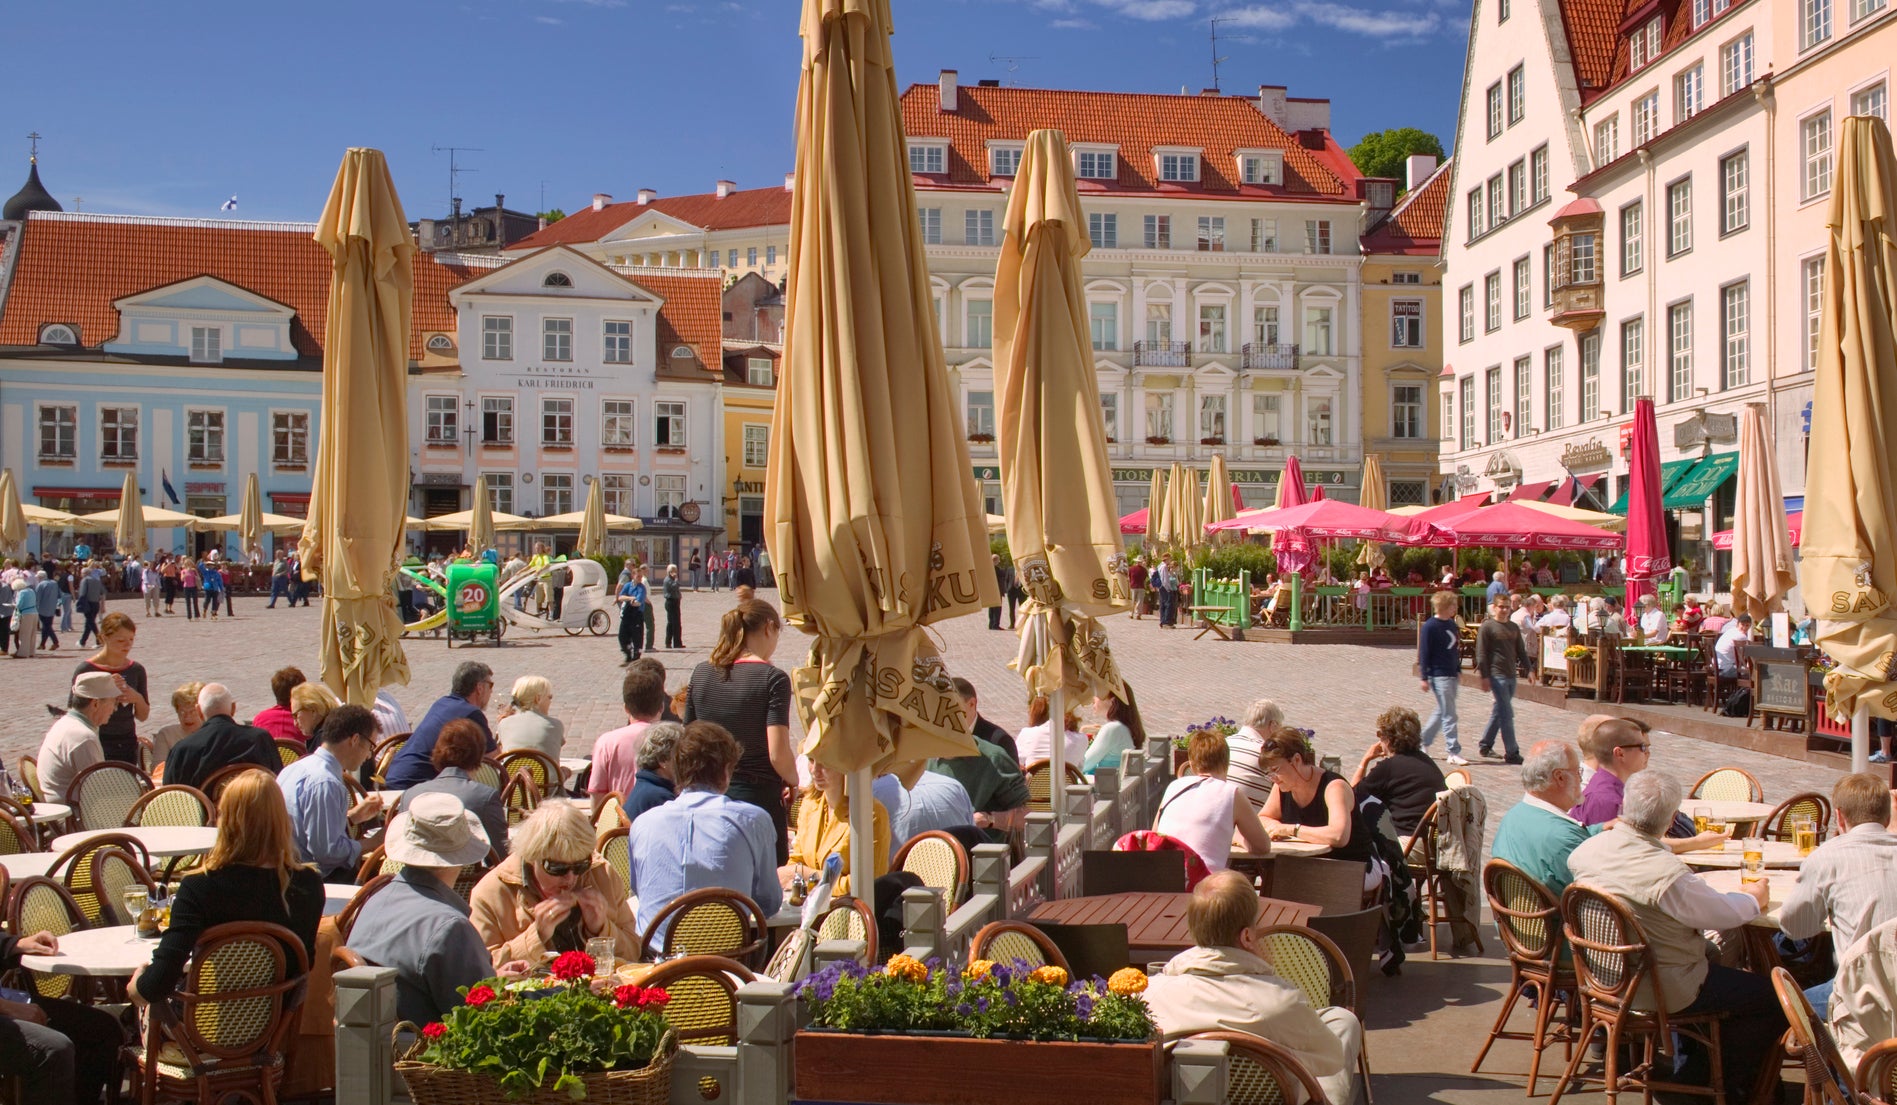 Outdoor café with people seated under umbrellas in a sunny town square